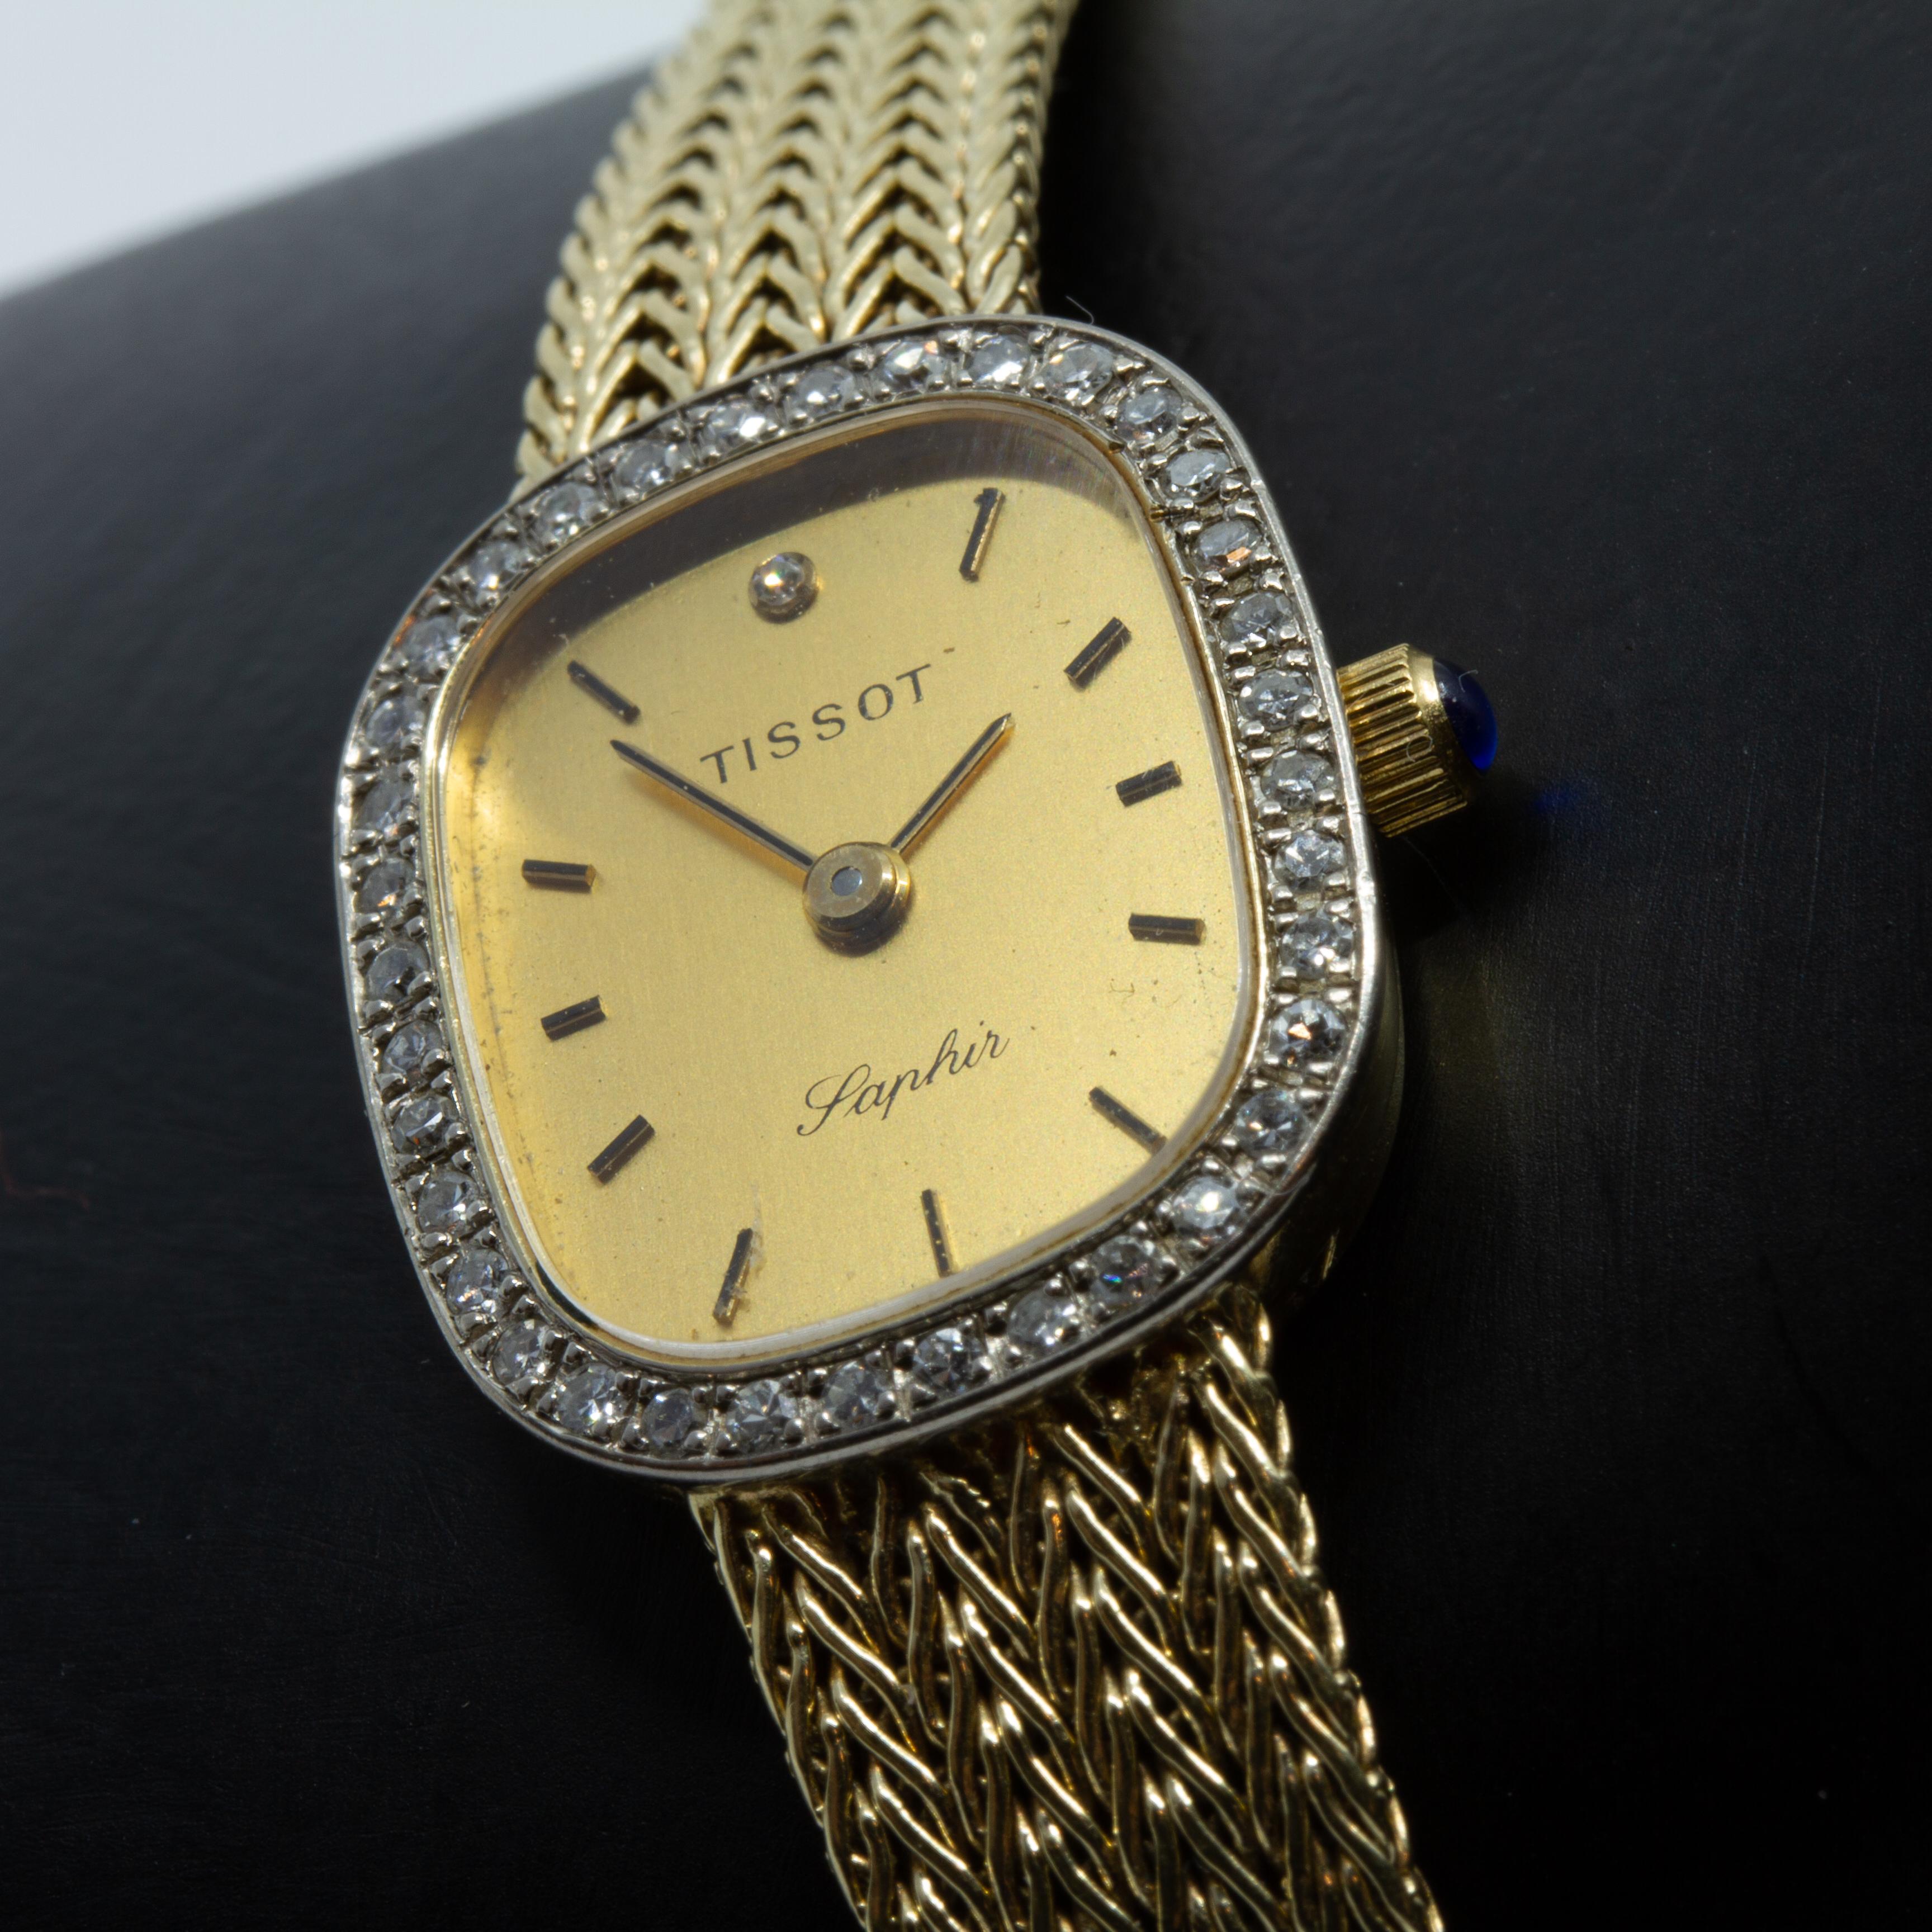 Offeredmis a circa 1980 TISSOT SAPHIR dress-watch, Swiss-made and crafted in subtle 14kt yellow gold. Boasting a sleek cushion-shaped yellow gold dial, with yellow gold and black colored hands, it is attached to a delicate but sturdy 14kt yellow